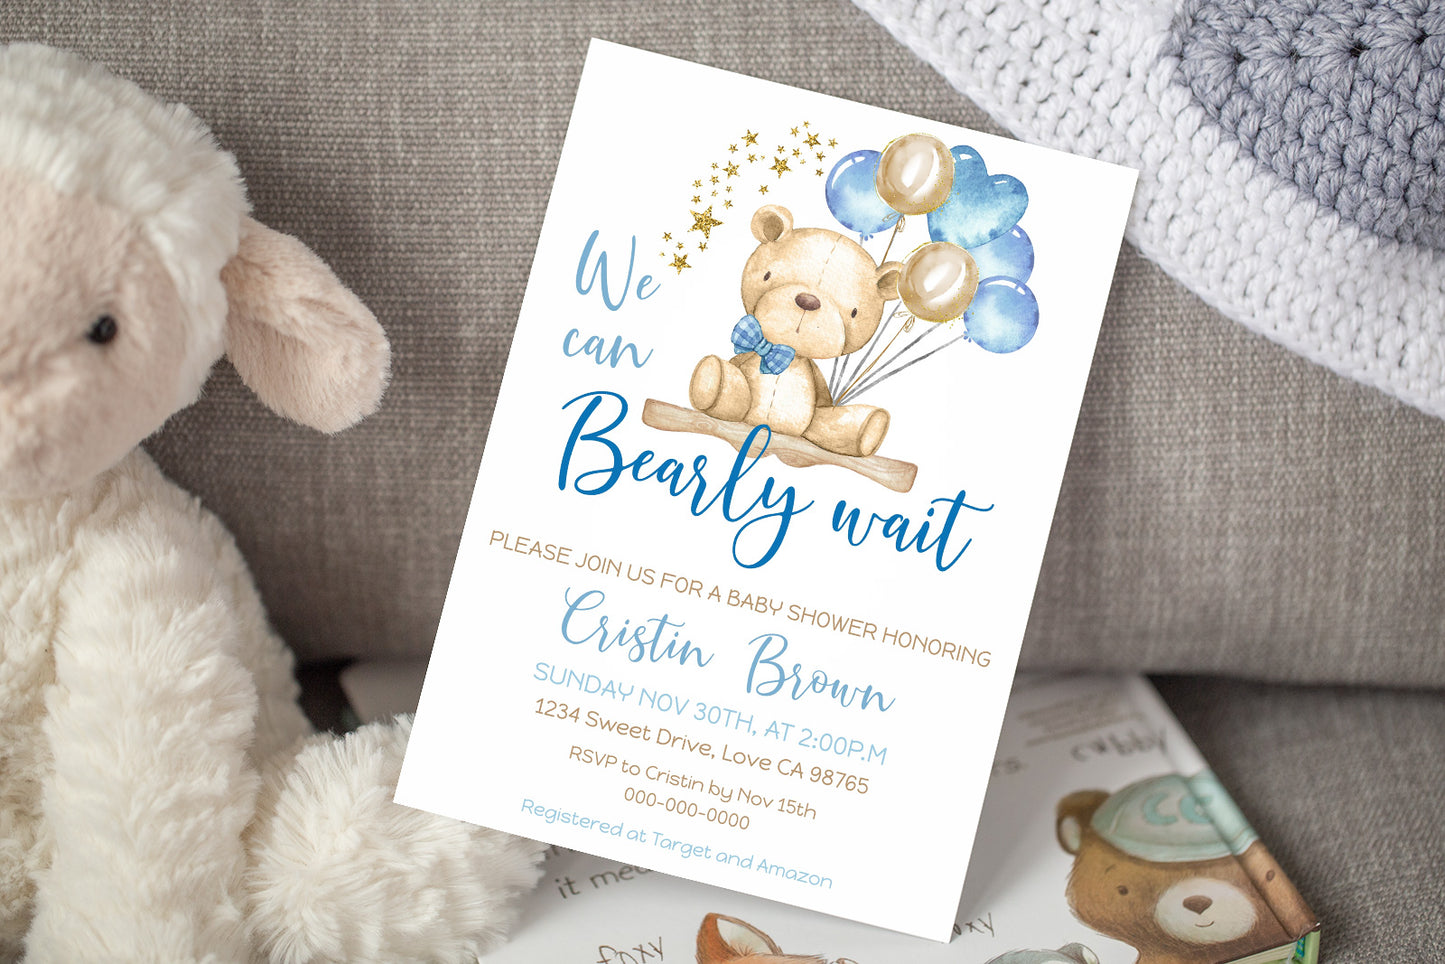 Gold and Blue Teddy Bear Baby Shower Invitation - 76A